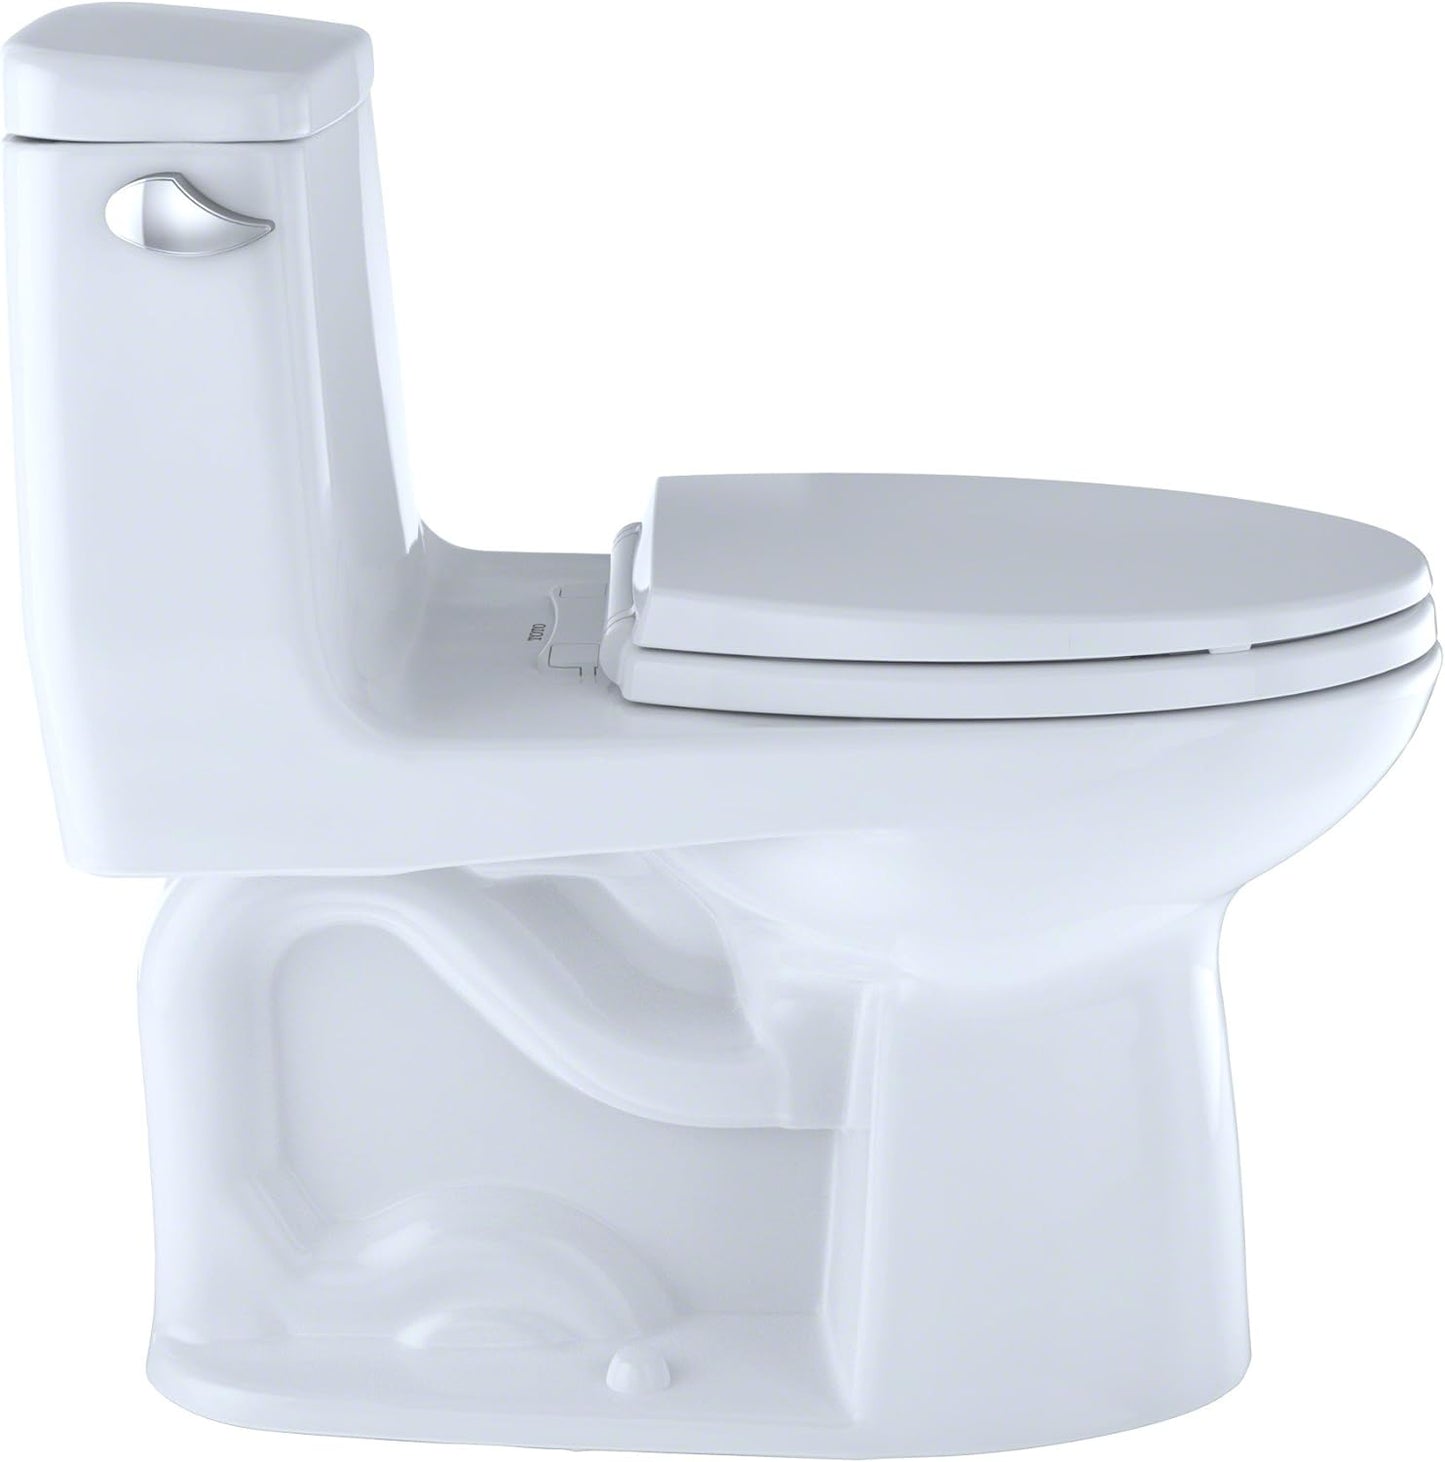 TOTO Toilet - 1.6 gpf, G-Max, Floor Mount, Elongated, Cotton White, With SoftClose Seat, Eco Ultramax, One Piece, 16-5/8"W 28-1/8" Depth